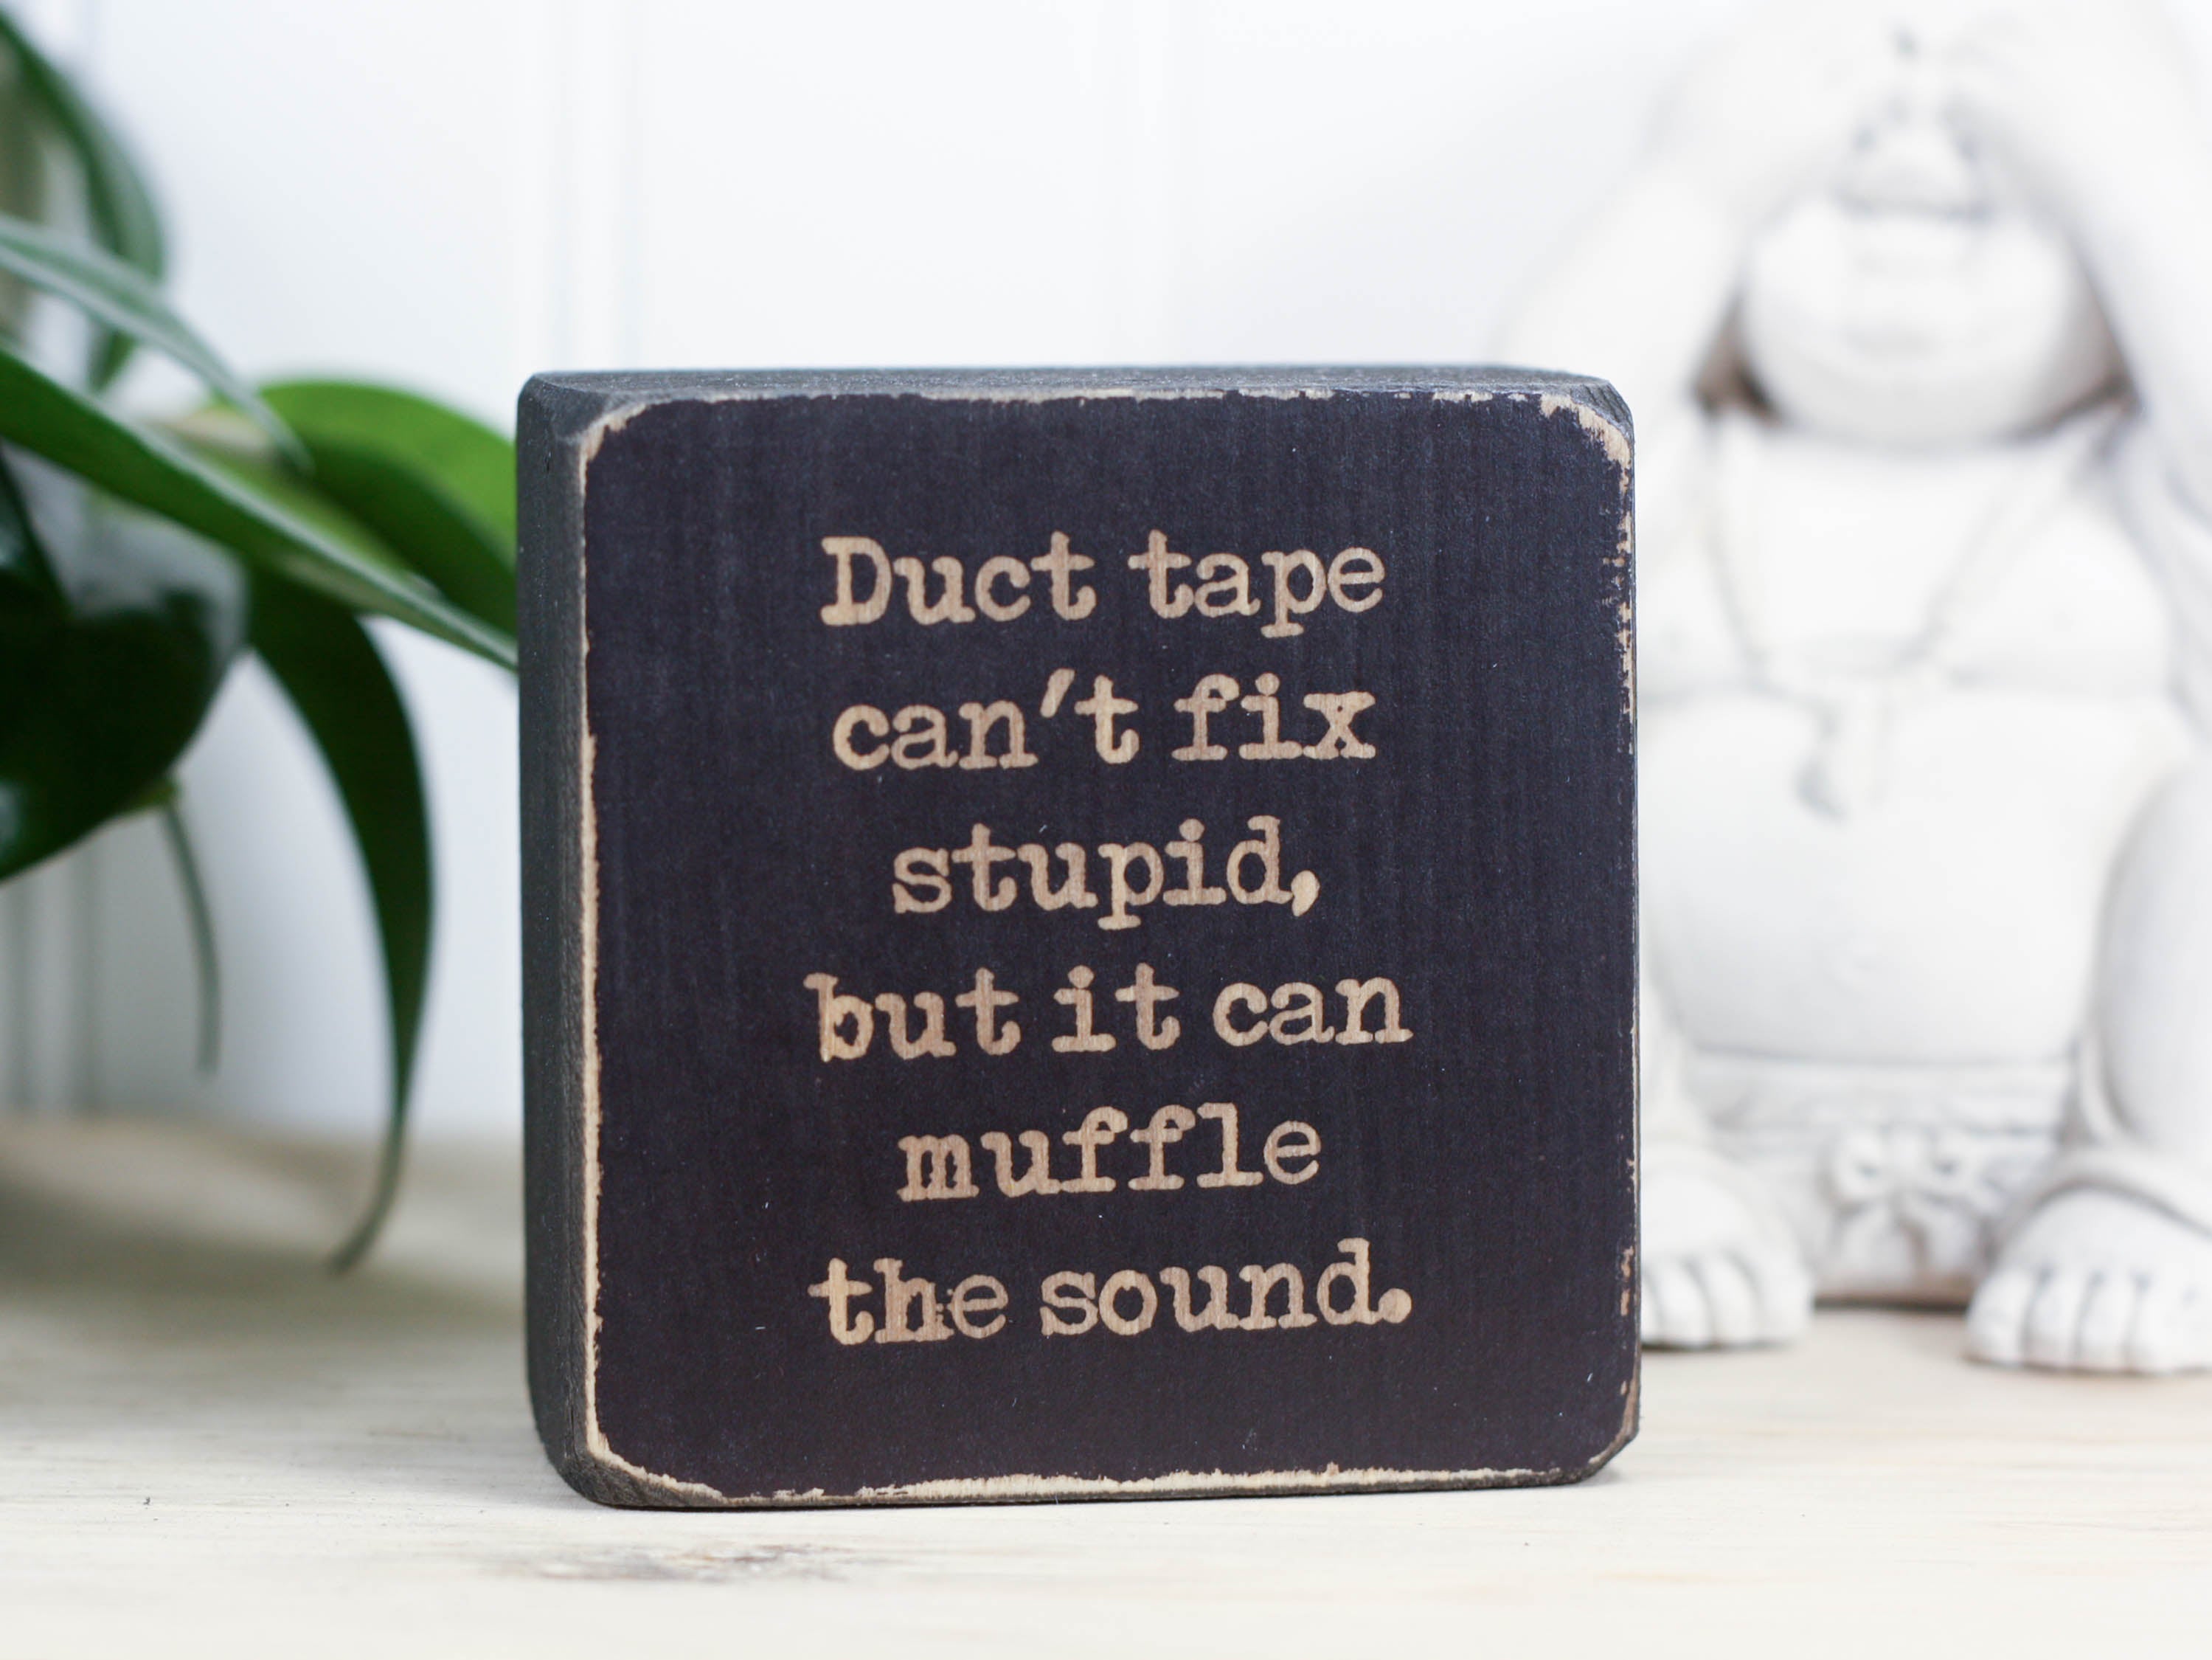 Small, freestanding, distressed black, solid wood sign with funny saying "Duct tape can't fix stupid, but it can muffle the sound."